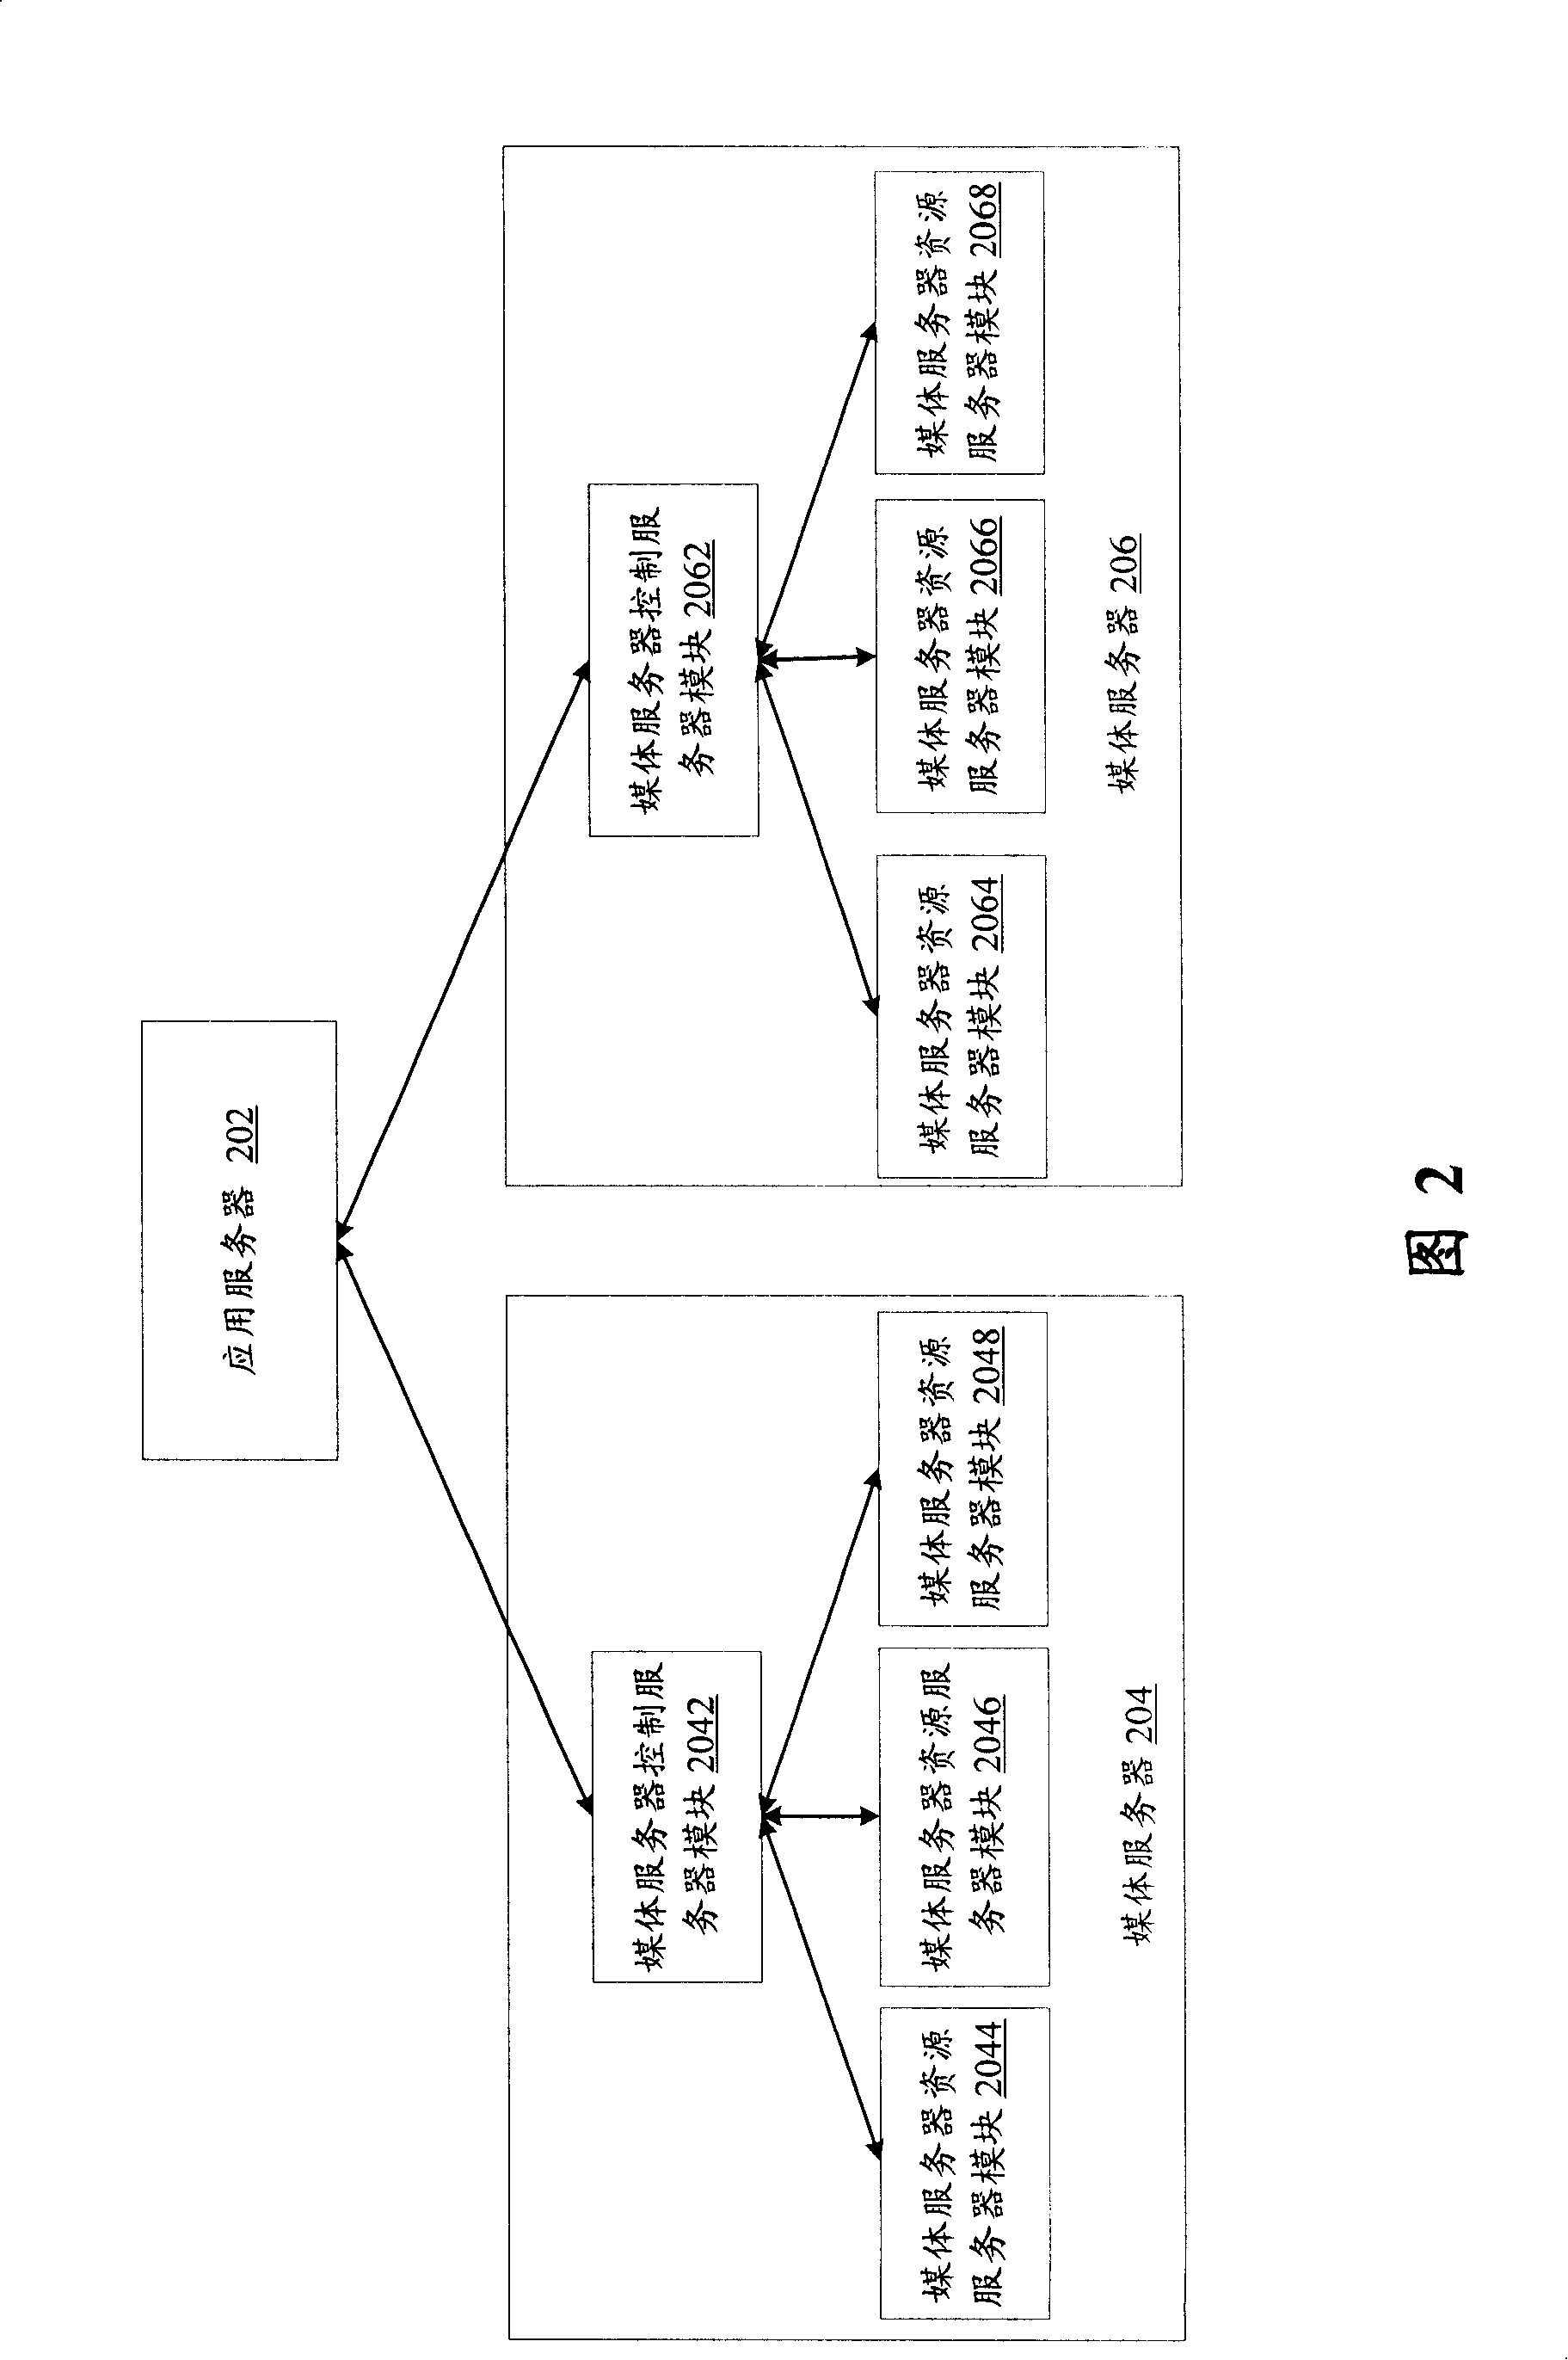 Media operation trusteeship switching system and method